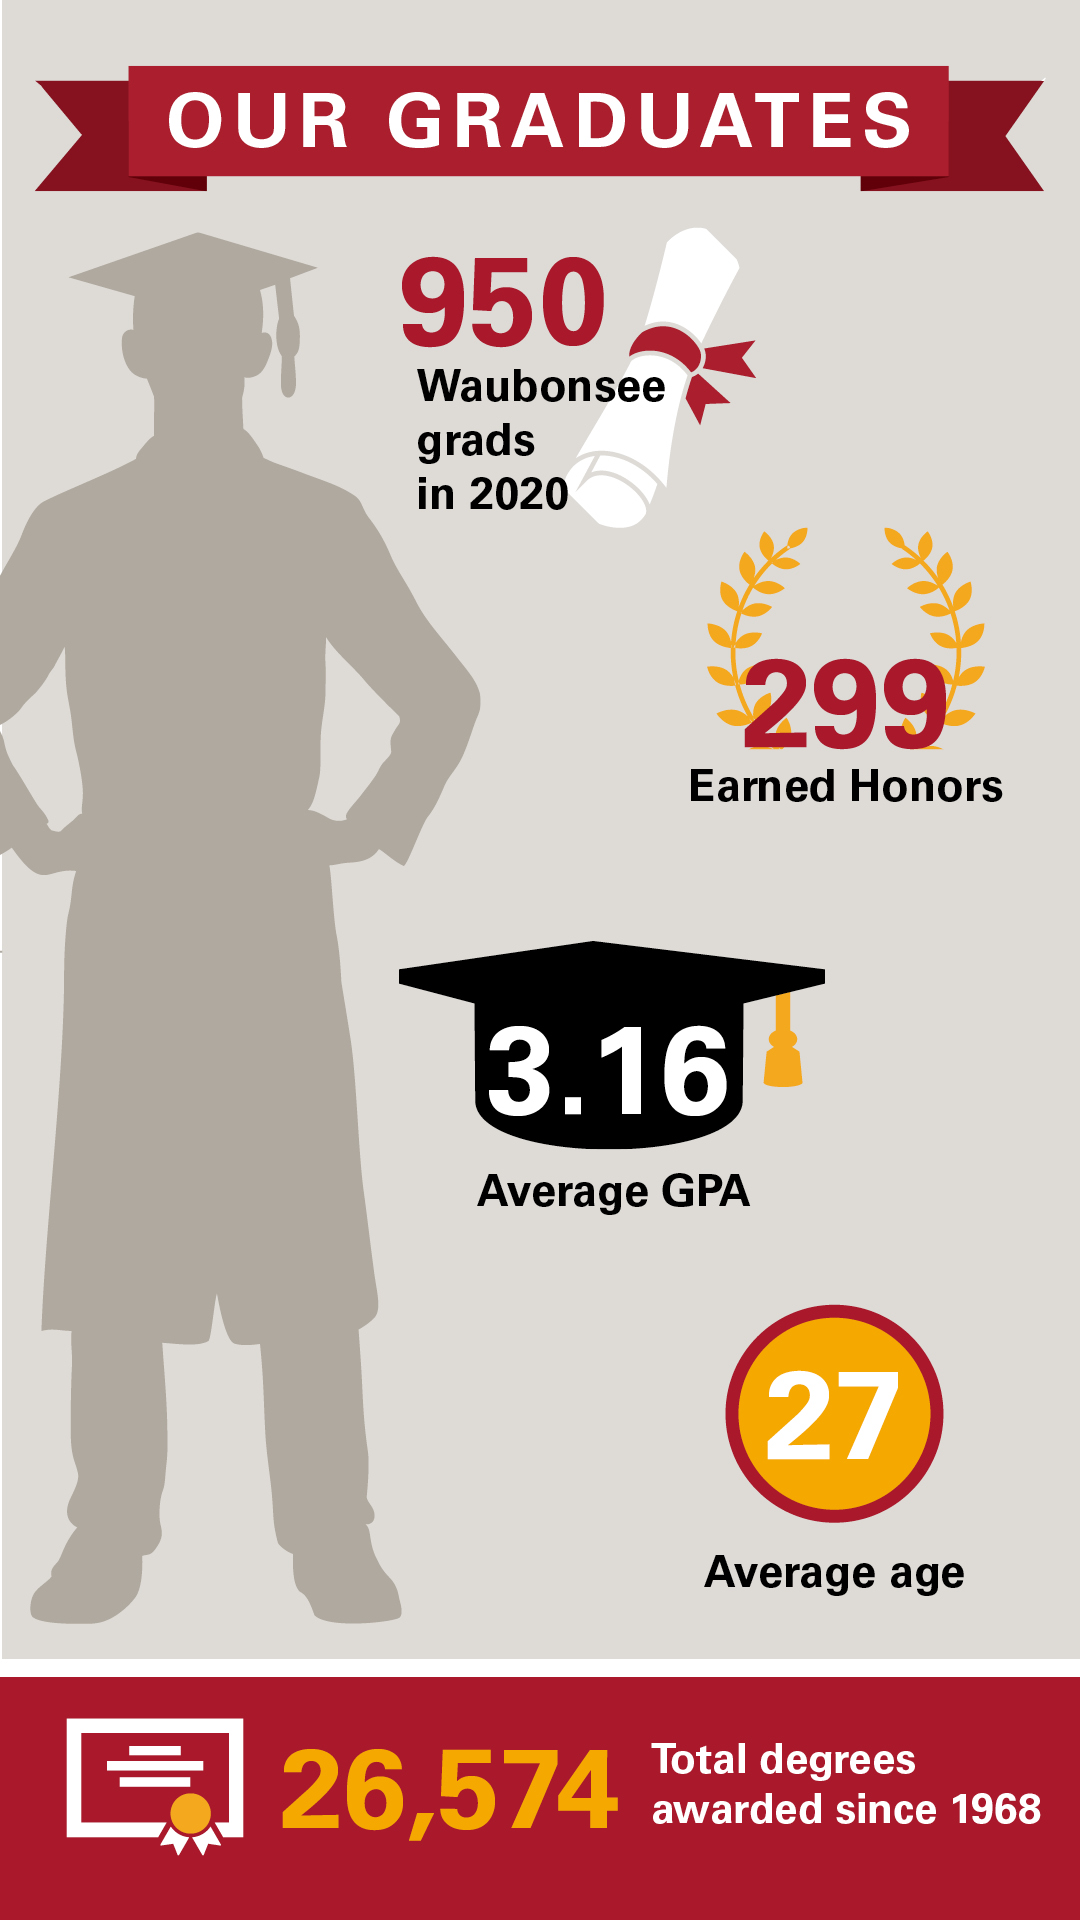 2020 Graduate Info Graphic: 950 grads, 258 earned honors, 3.16 average GPA, average age of student is 27, there were 26,574 total degrees awarded since 1968